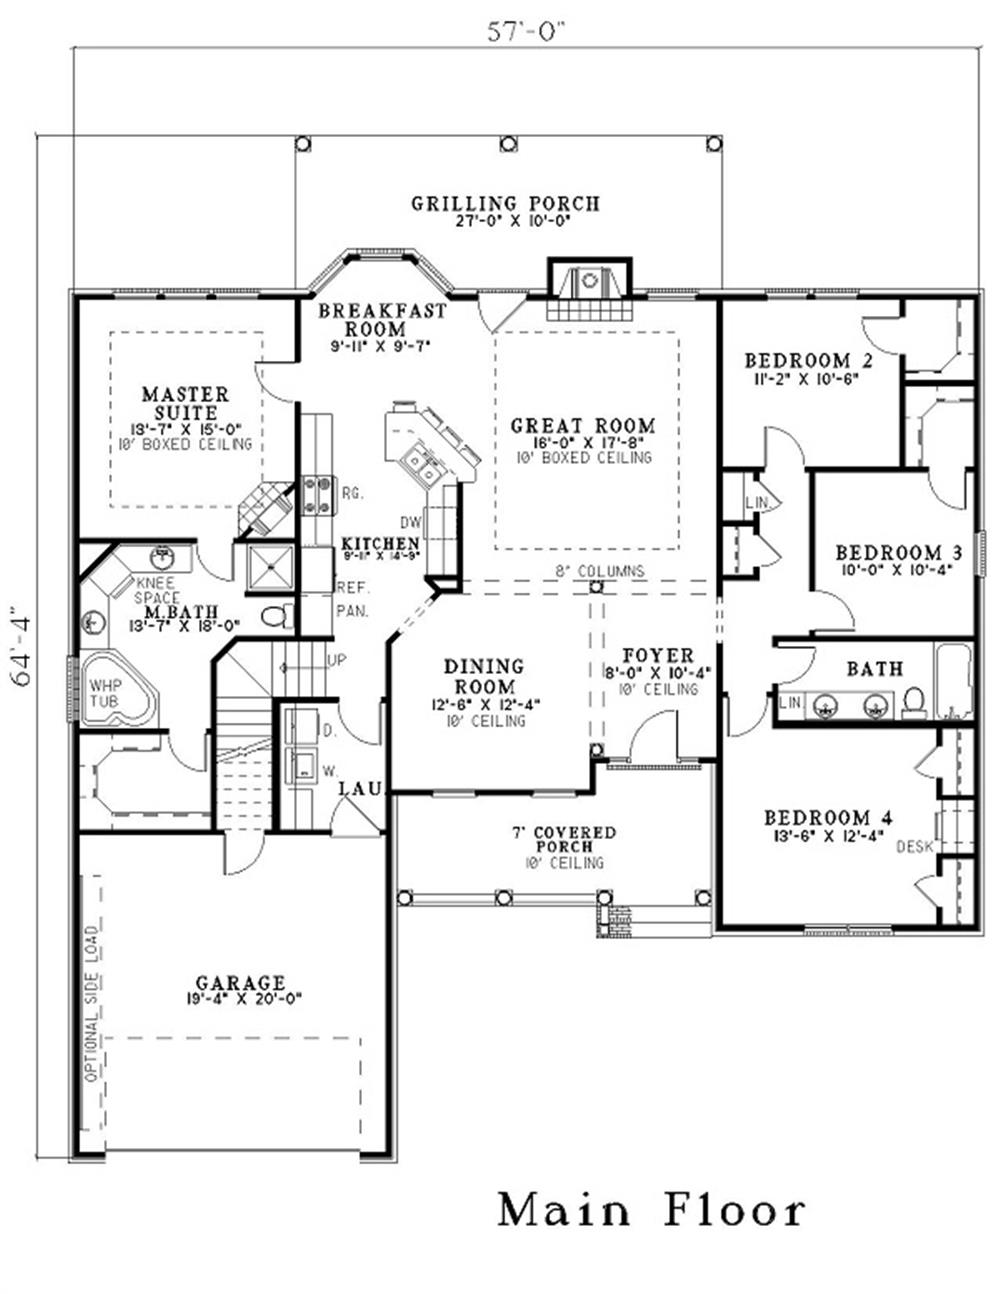 House Floor Plan With Dimensions house floor plan with dimensions 